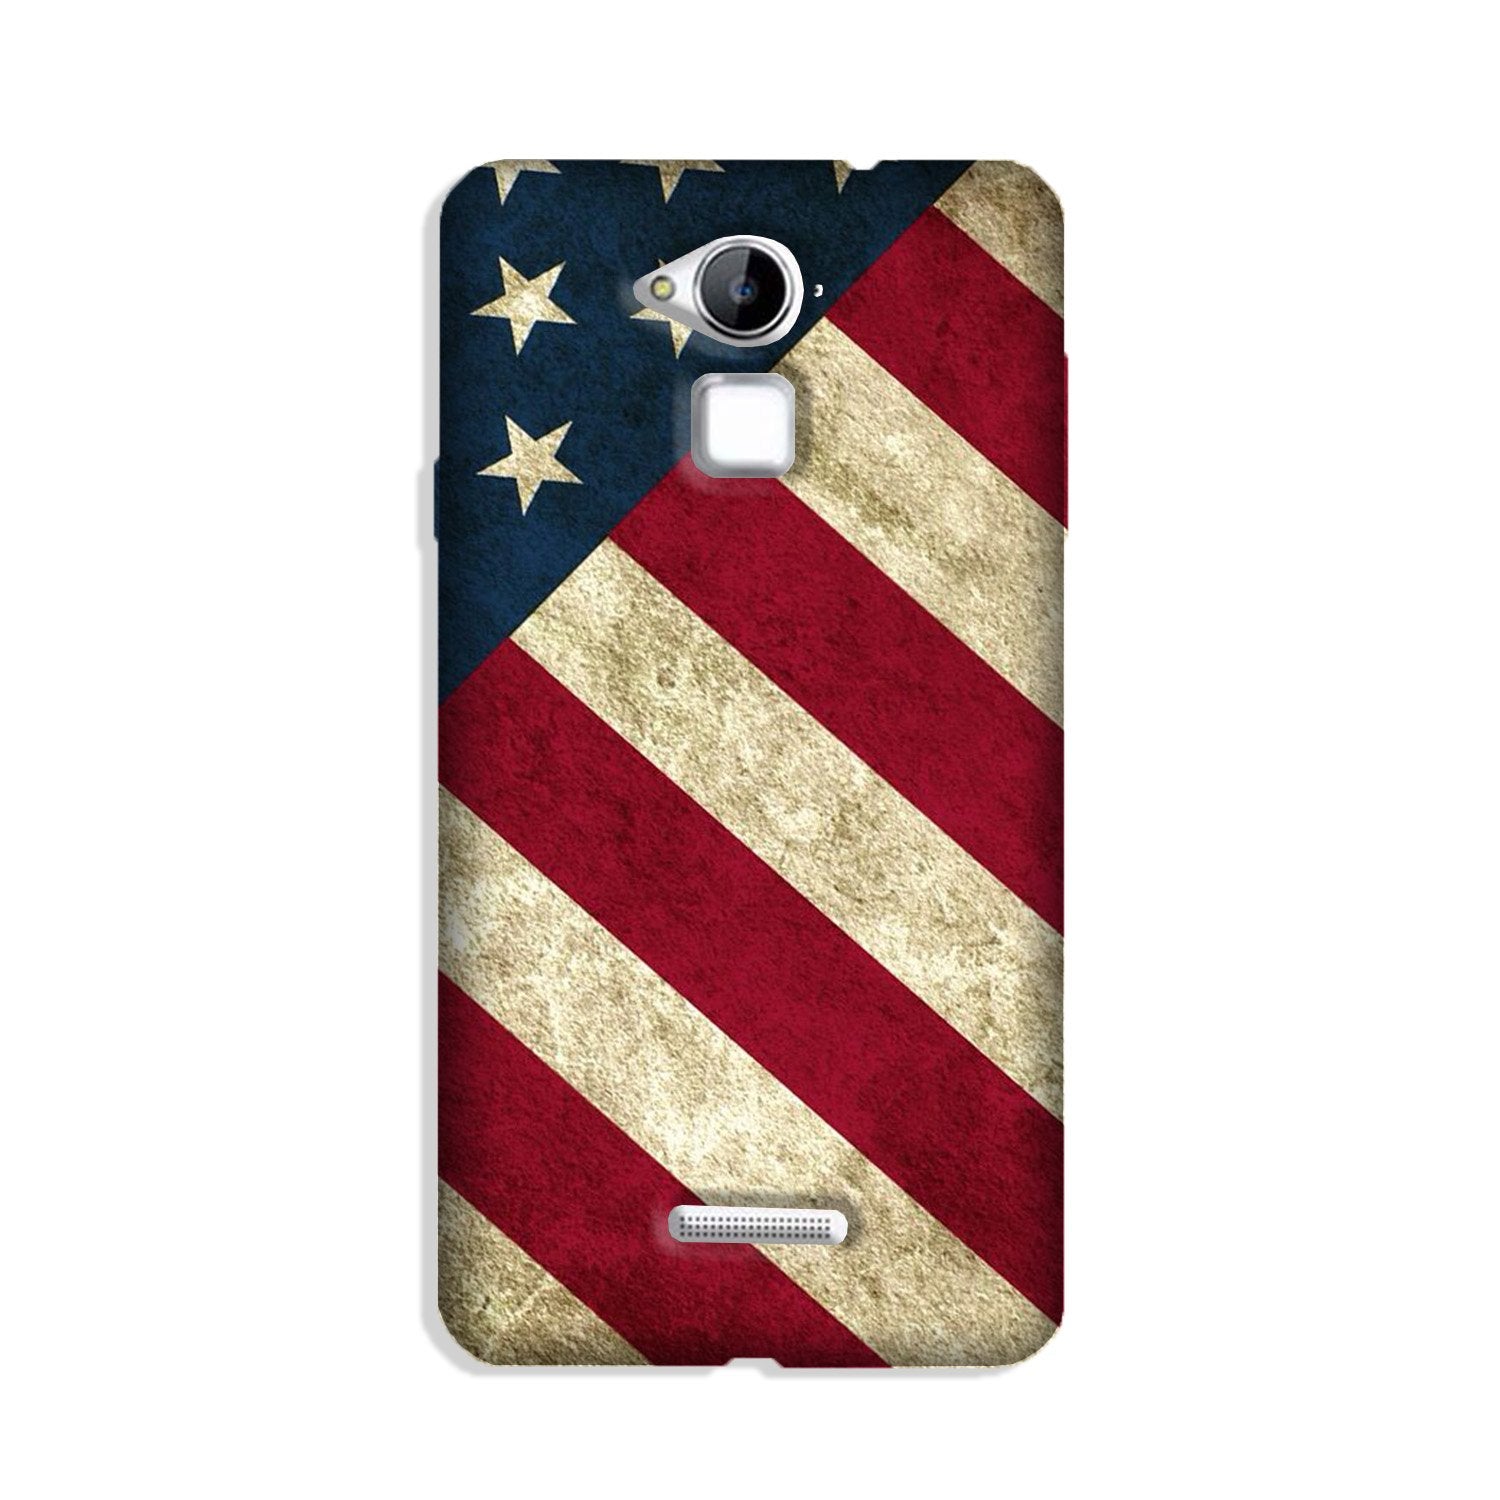 America Case for Coolpad Note 3